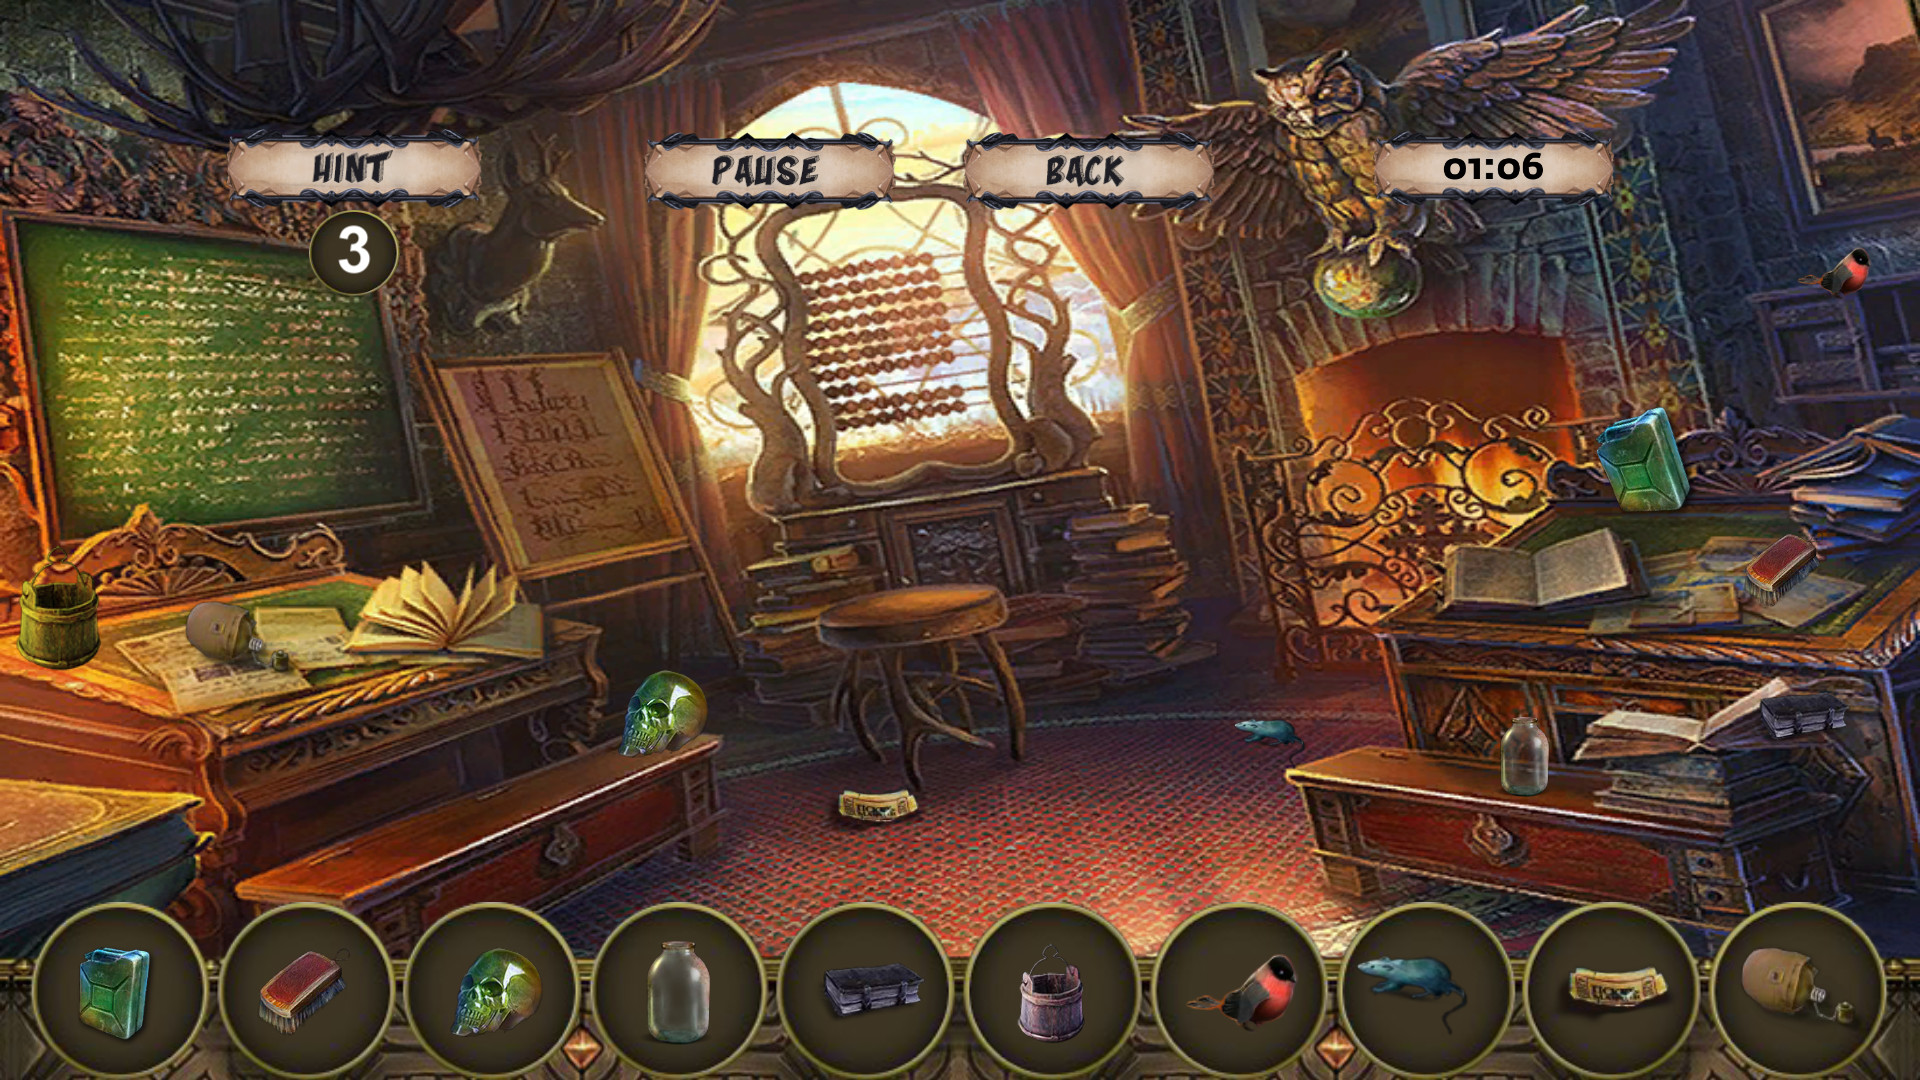 instal the last version for ios Unexposed: Hidden Object Mystery Game